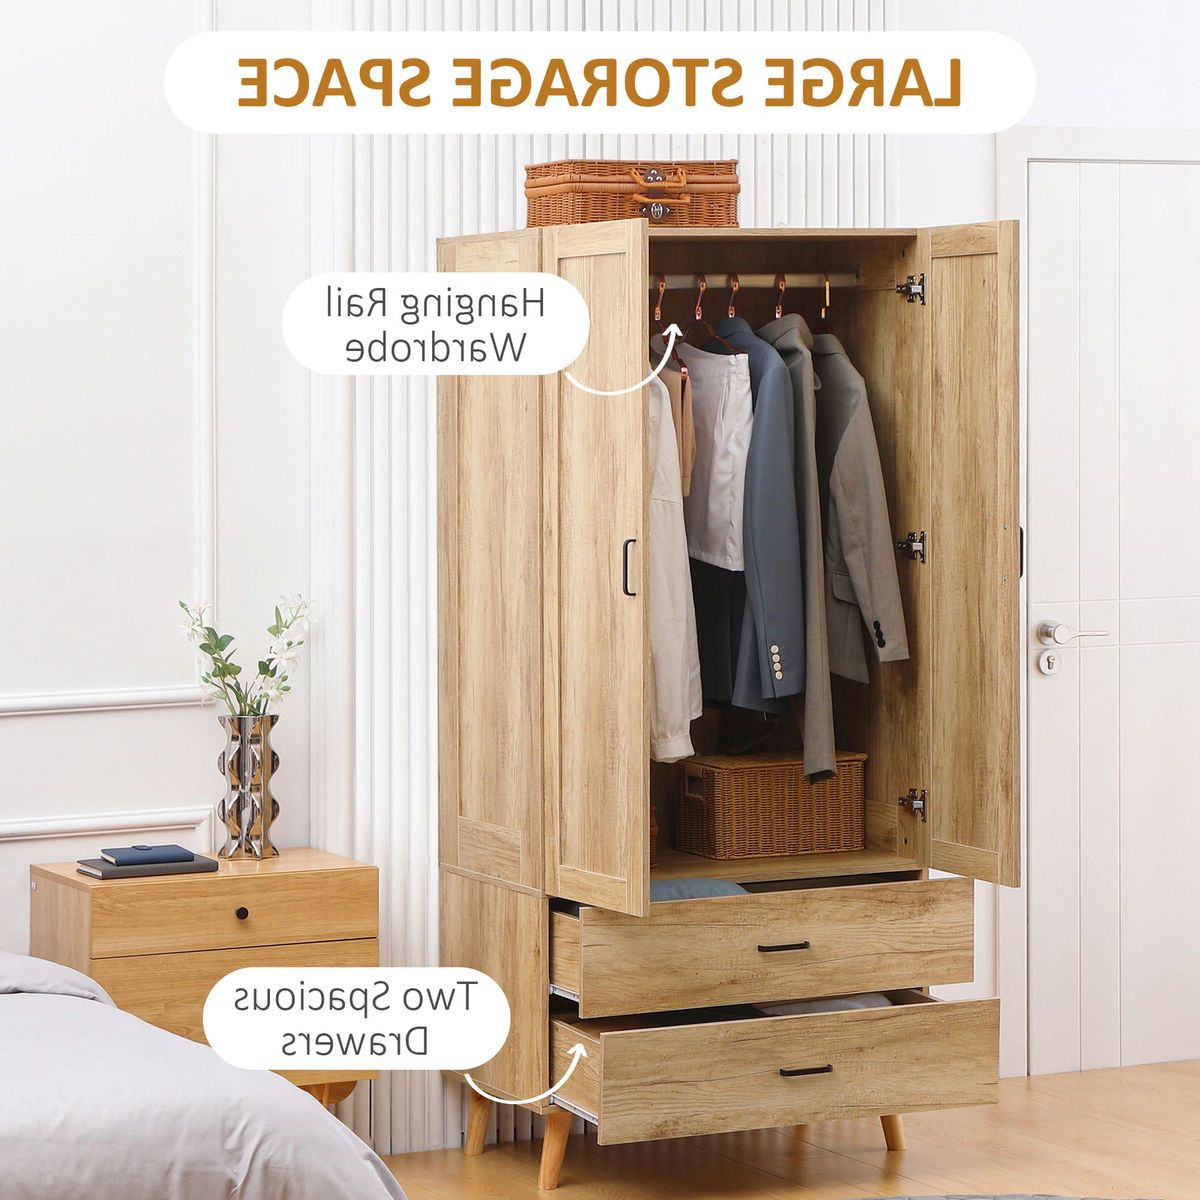 Wooden Wardrobe Double Door Closet Hanging Rail Clothing Storage Organiser  Shelf | Ebay In Wardrobes With Double Hanging Rail (View 9 of 20)